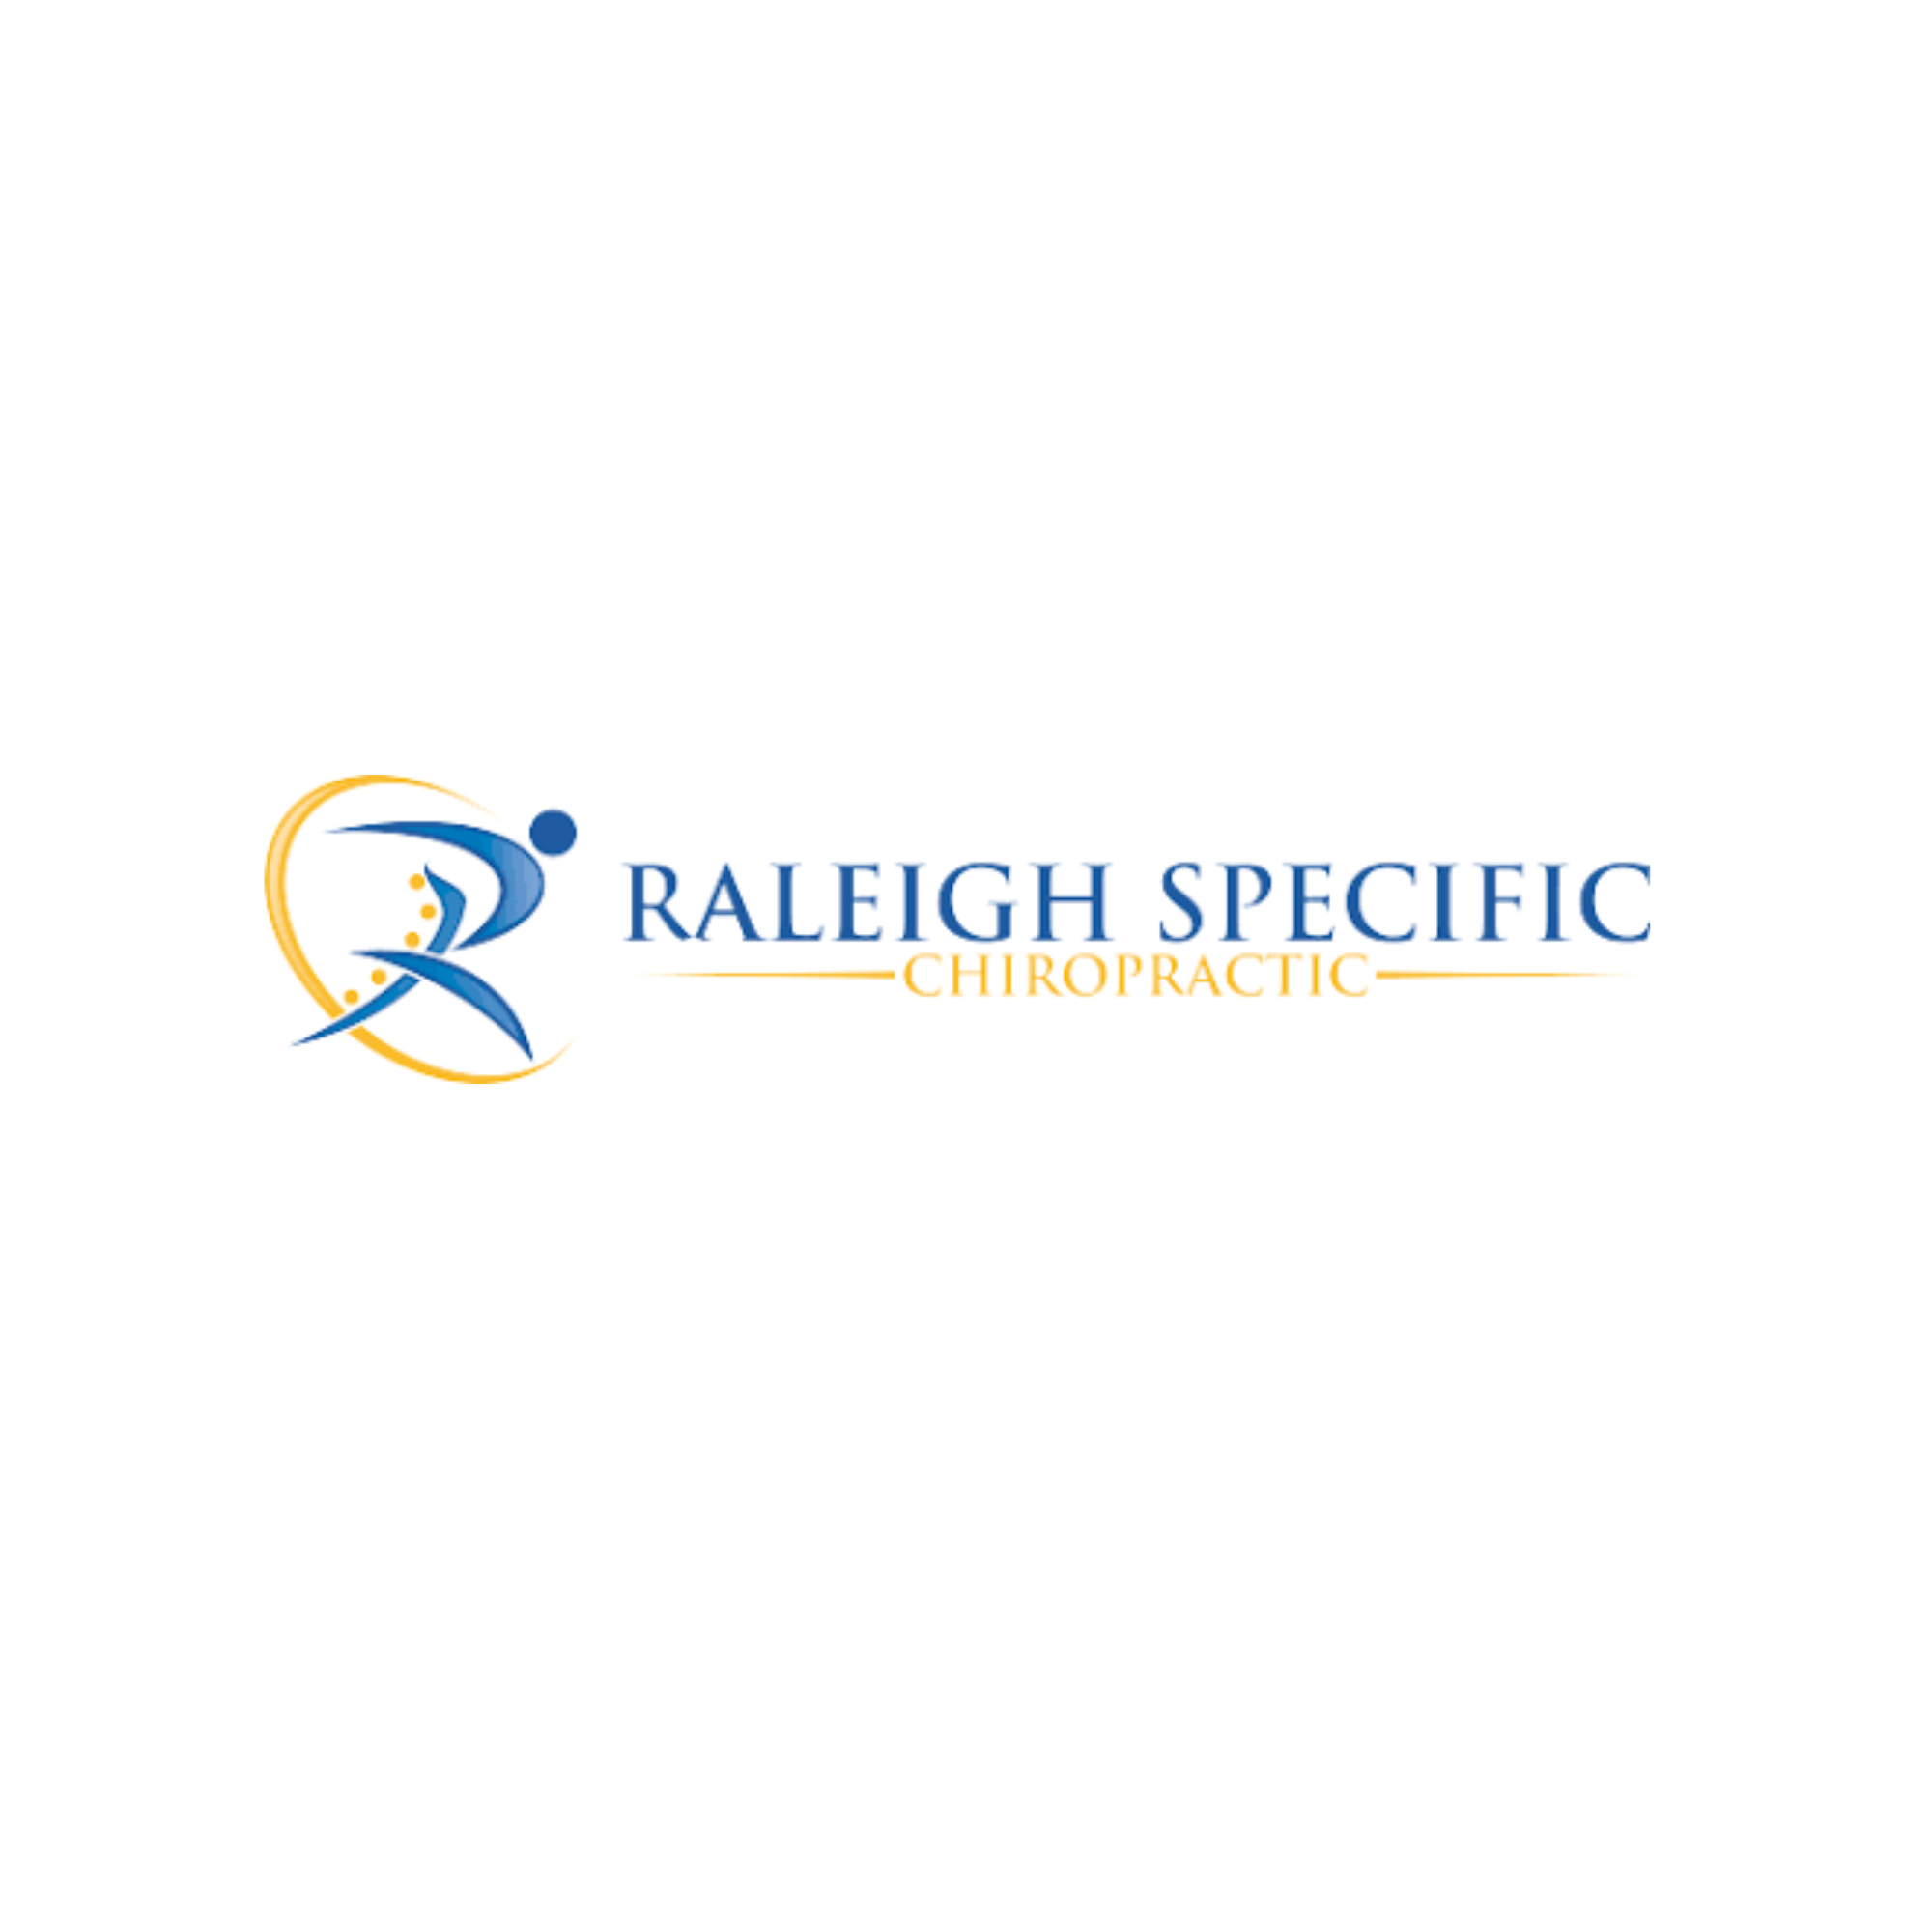 Raleigh Specific Chiropractic & Spinal Decompression